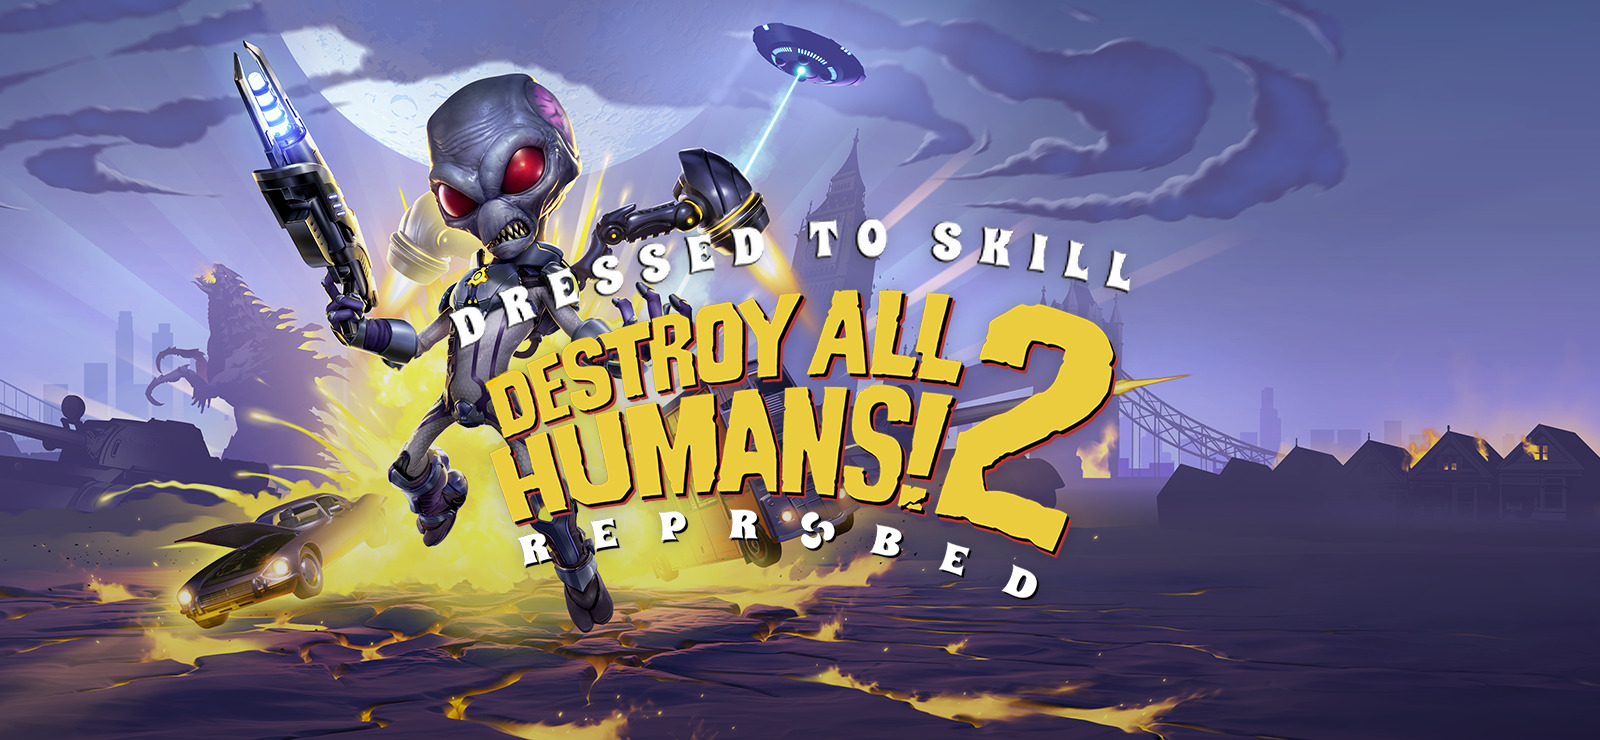 Destroy all humans reprobed. Destroy all Humans 2 reprobed. Игра destroy all Humans 2. Destroy all Humans 2 reprobed 2022. Destroy all Humans! 2 - Reprobed обложка.